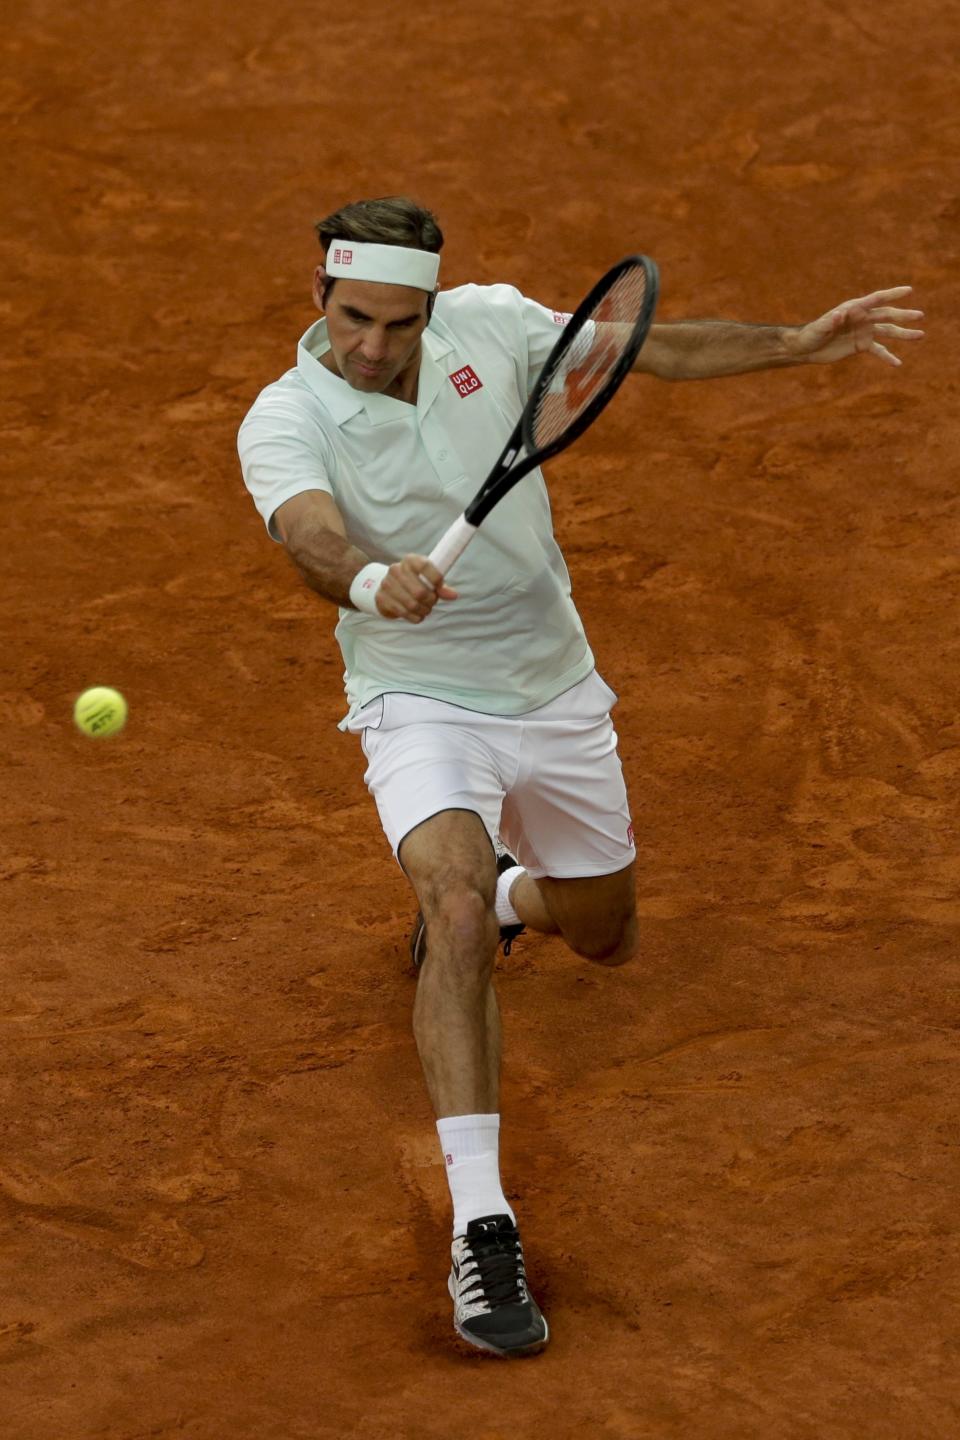 Roger Federer returns the ball to Richard Gasquet during the Madrid Open tennis tournament in Madrid, Tuesday, May 7, 2019. (AP Photo/Bernat Armangue)